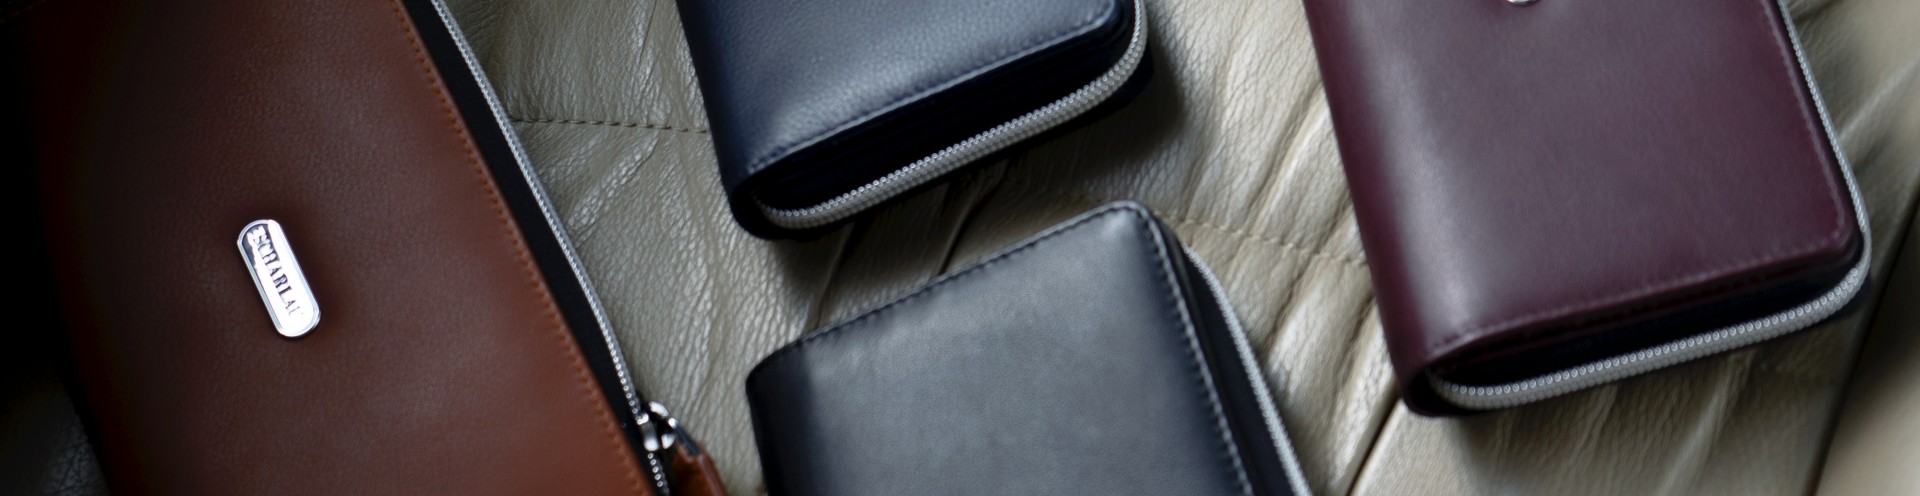 Women's Leather Wallets and Purses